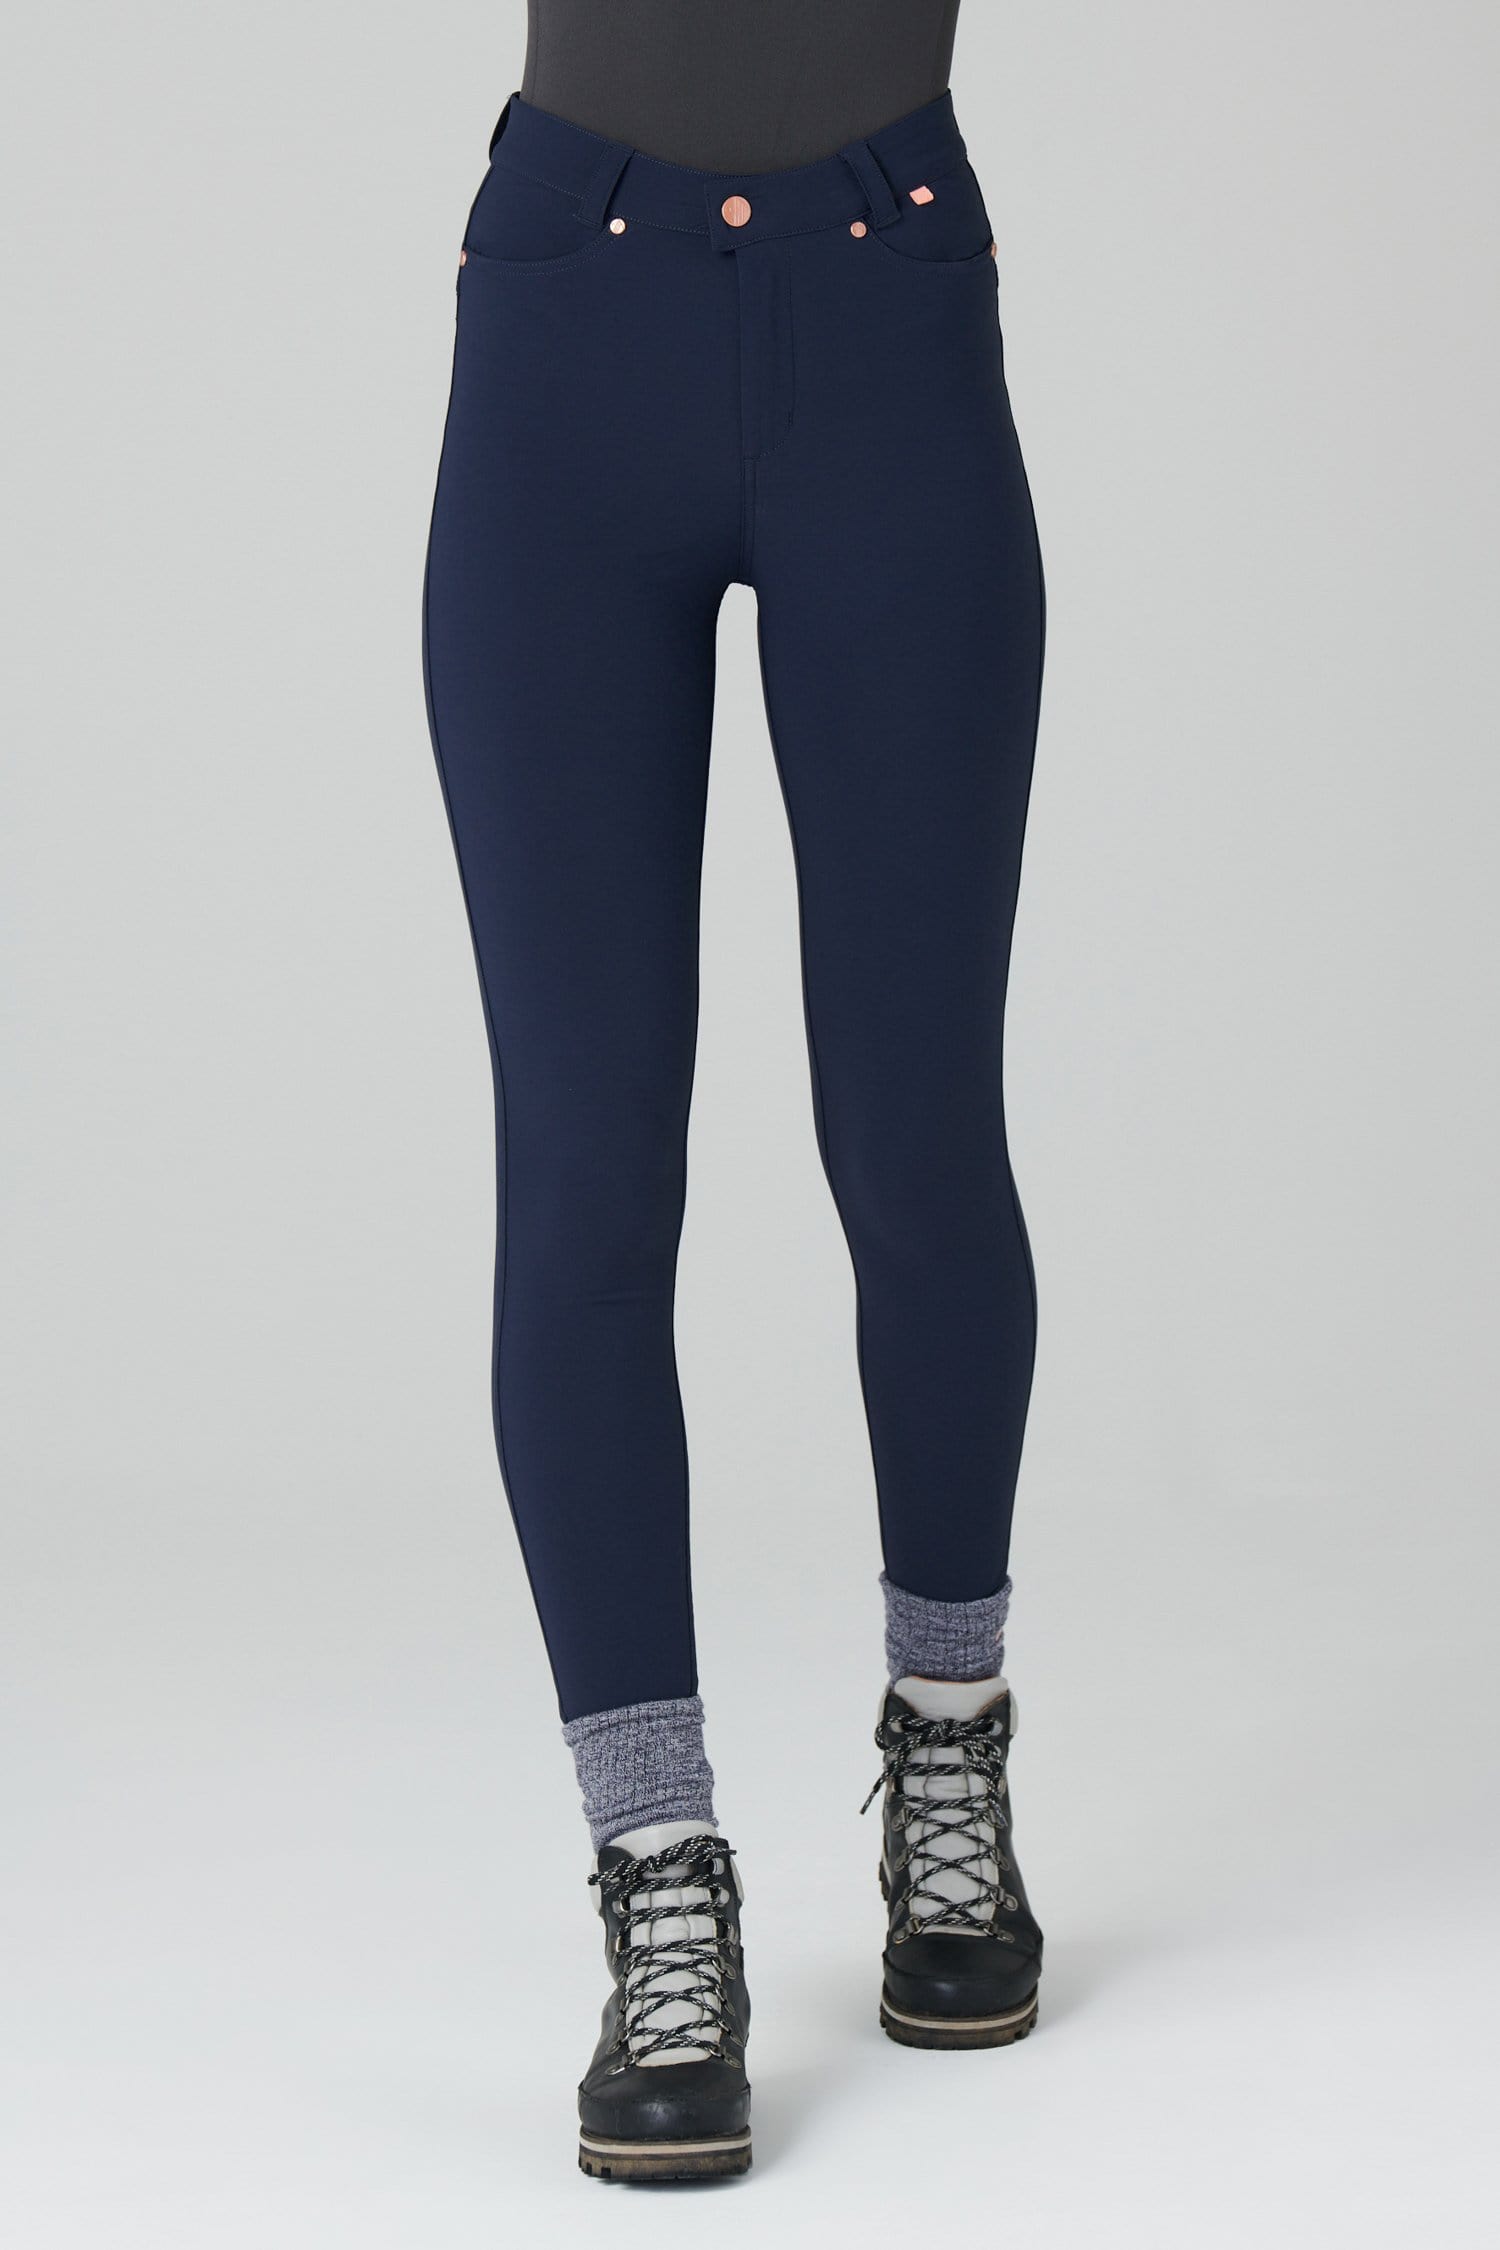 Max Stretch Skinny Outdoor Trousers - Deep Navy - 26l / Uk8 - Womens - Acai Outdoorwear